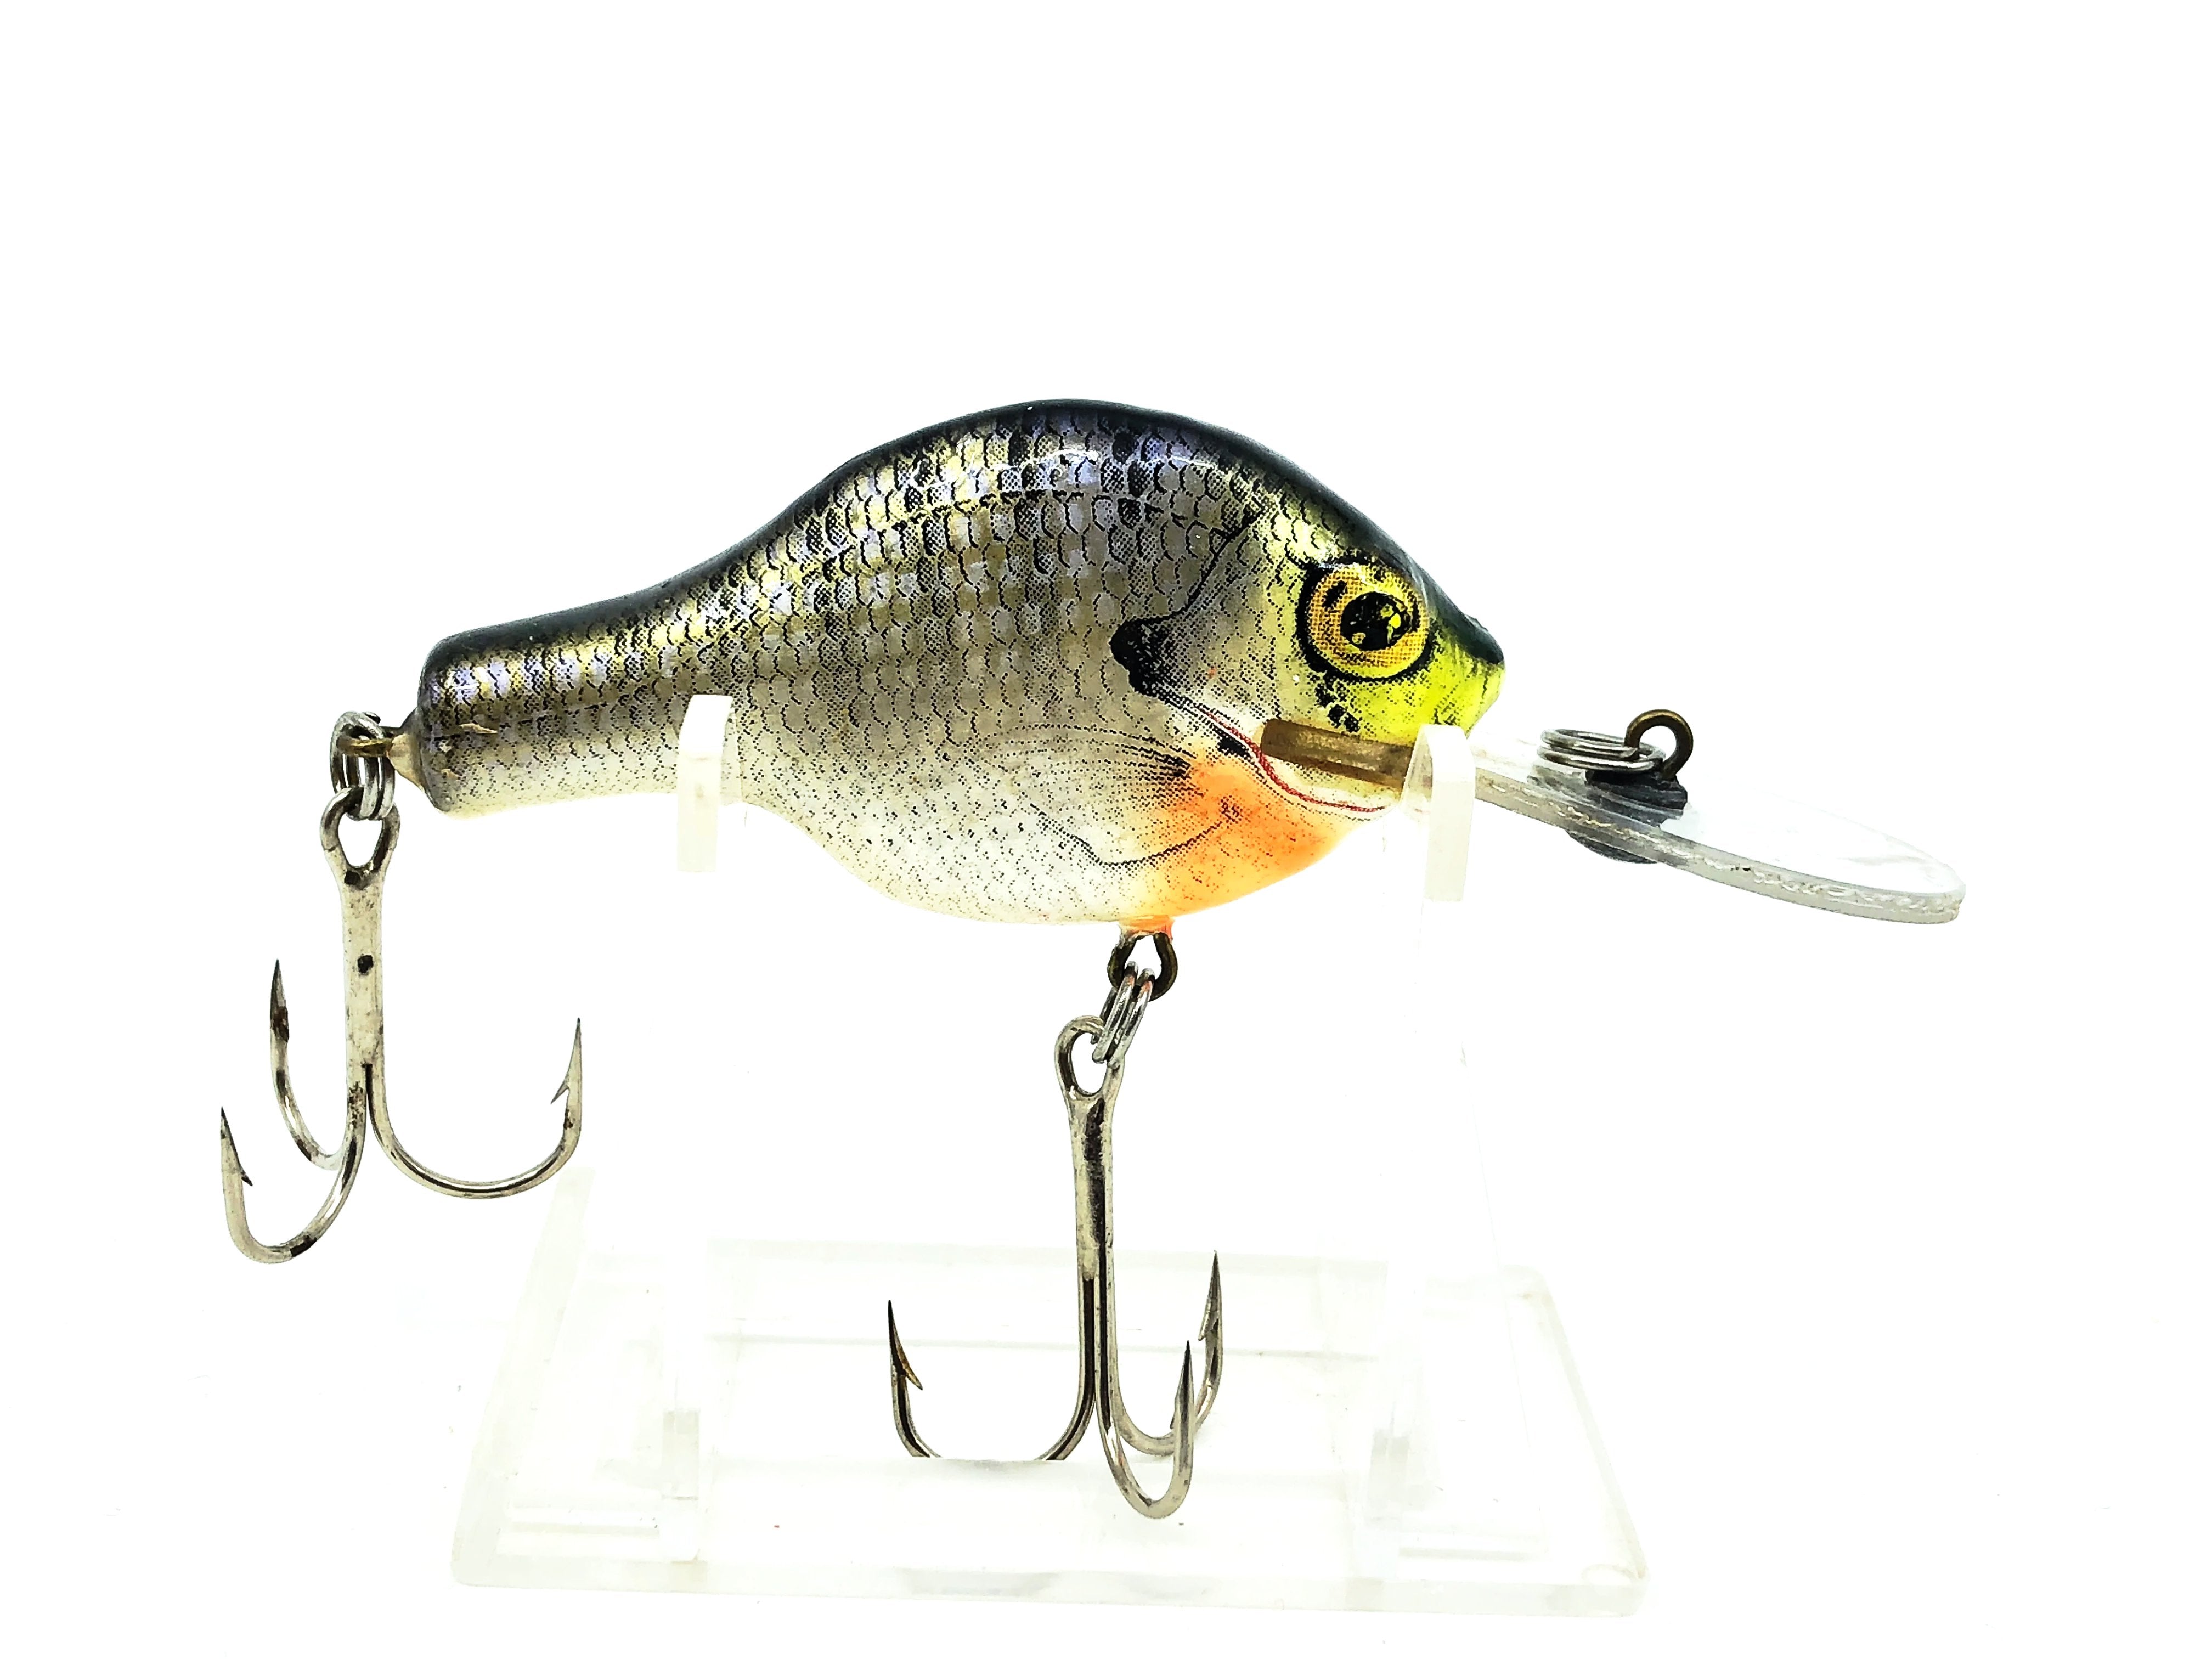 Vintage Bagley Black On Silver Foil Small Fry Shad Lure For Sale